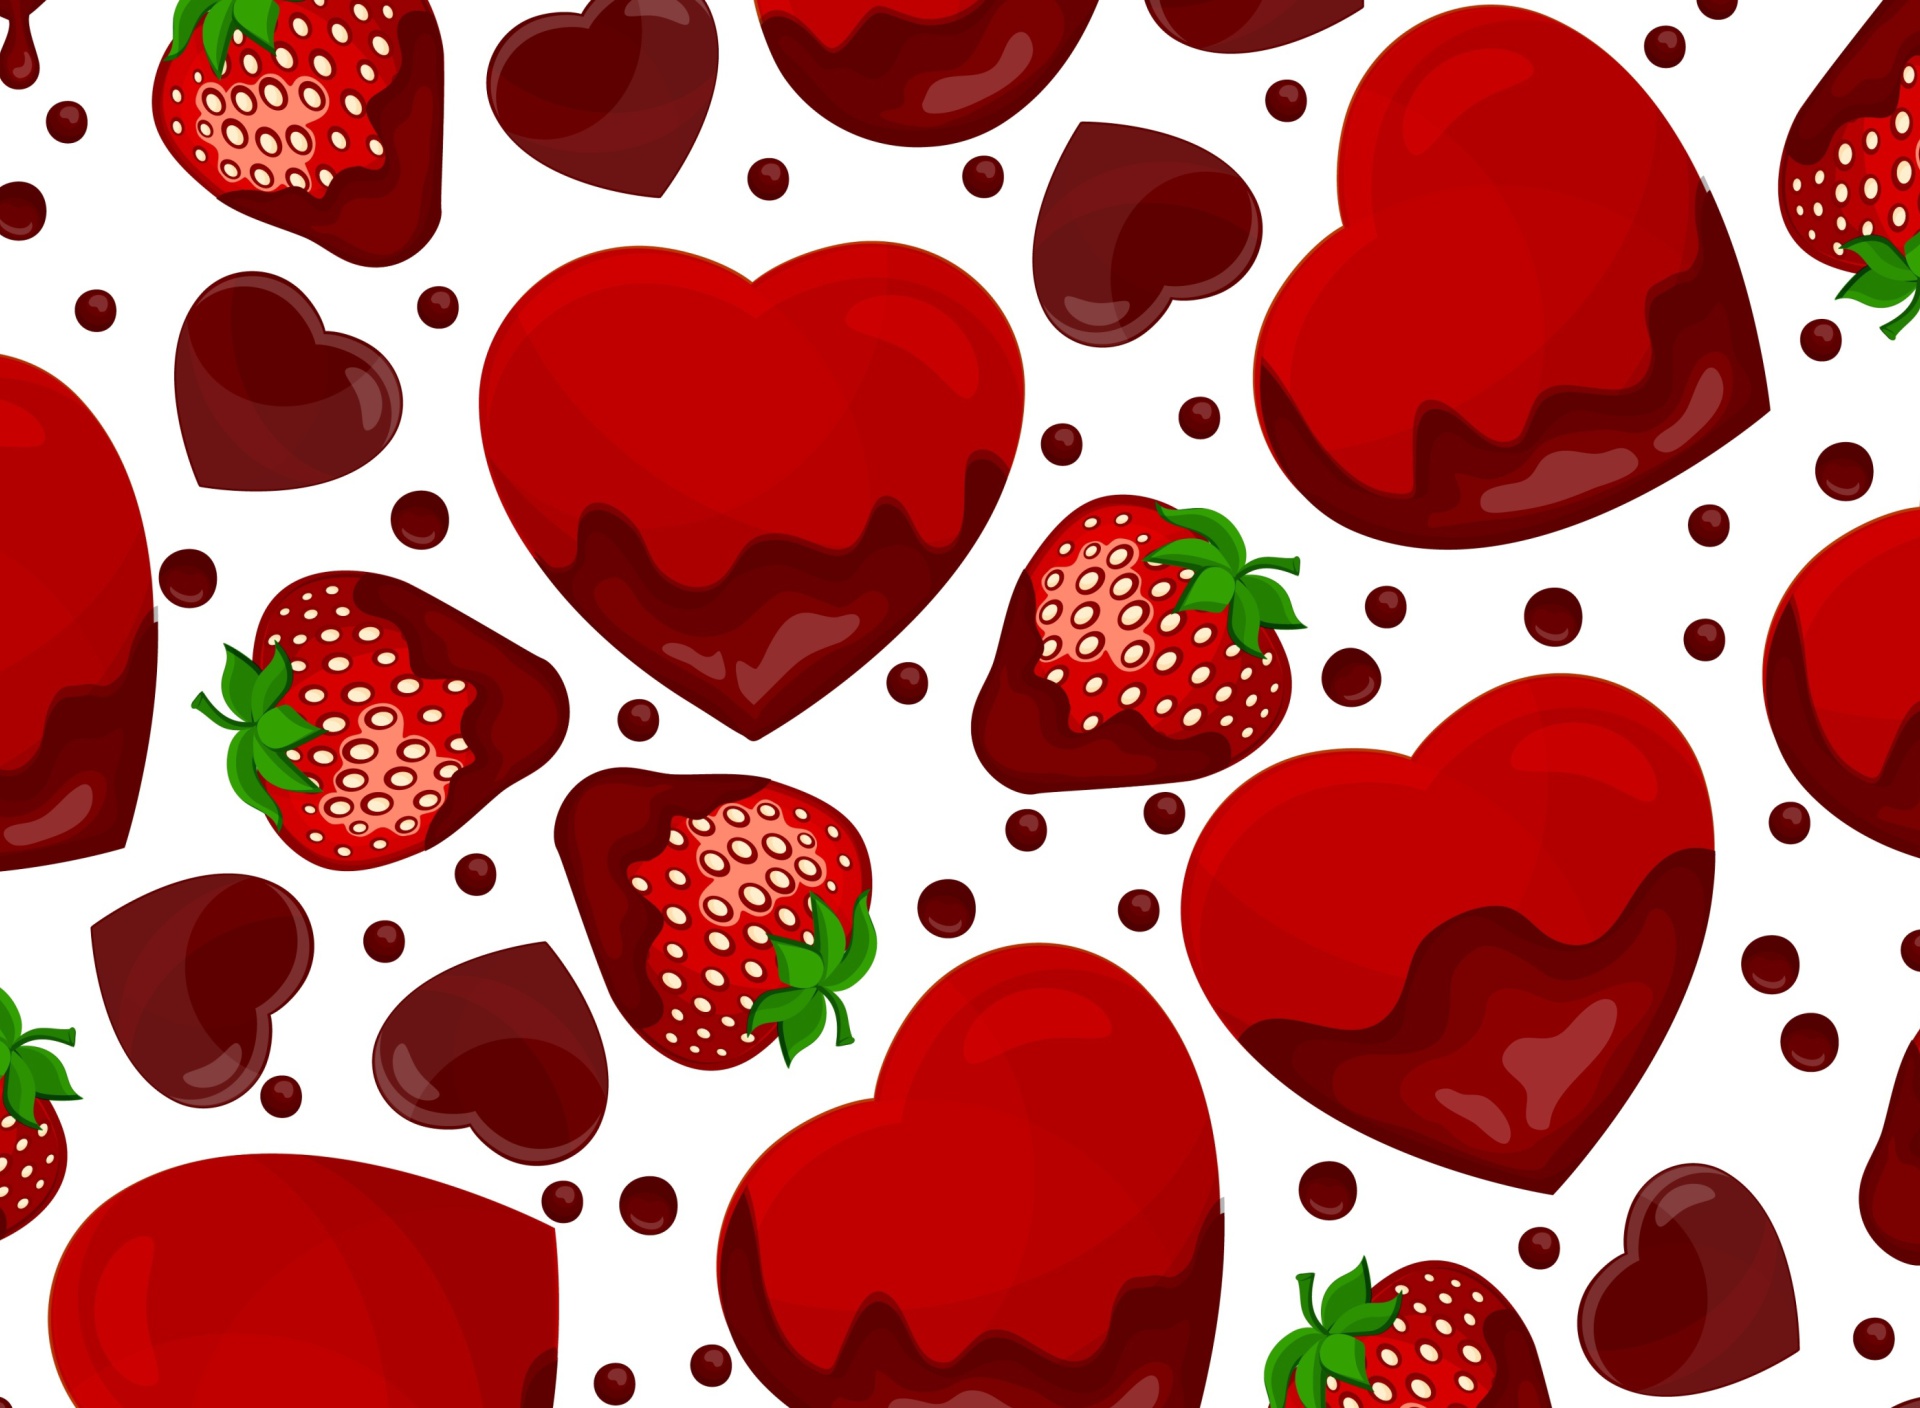 Strawberry and Hearts wallpaper 1920x1408